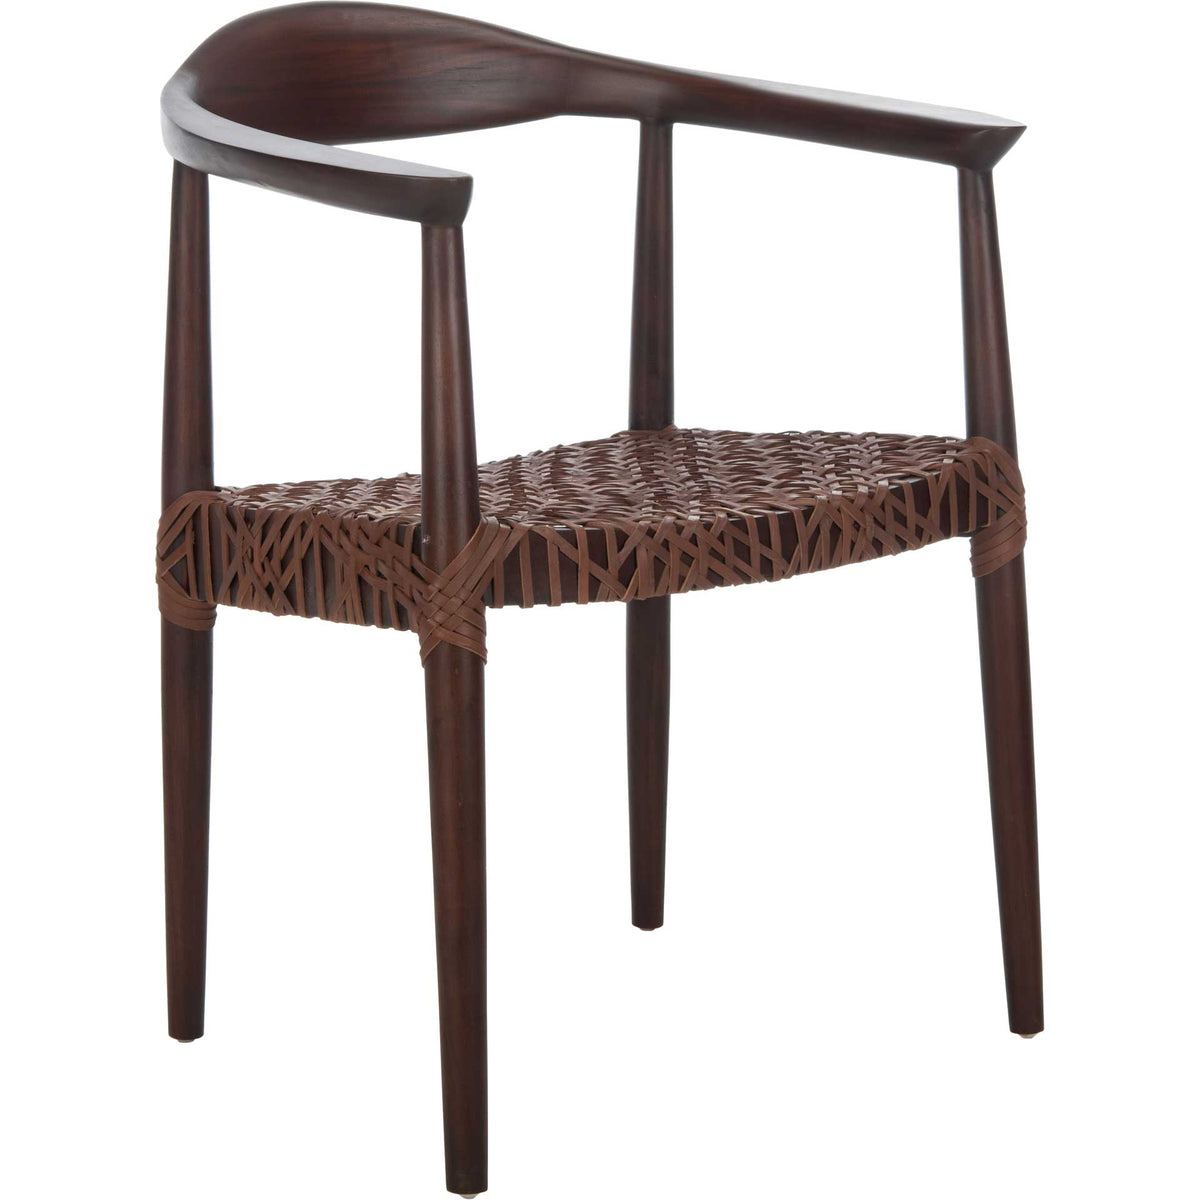 Justin Leather Woven Accent Chair Walnut/Brown